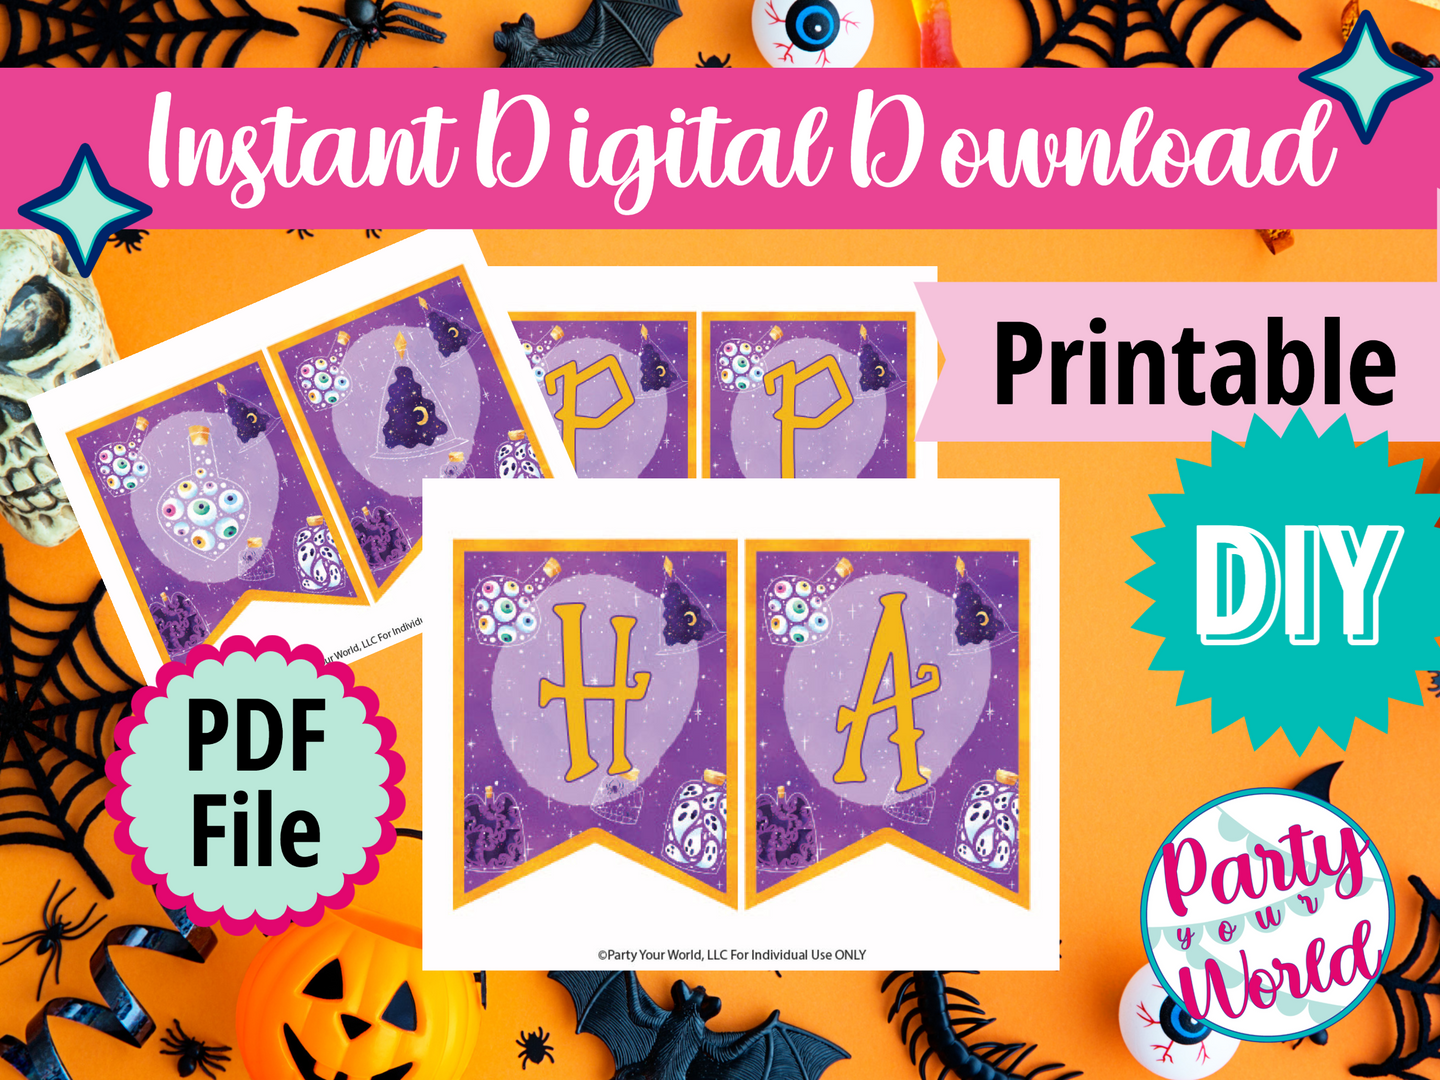 Happy Halloween Spooky Potions Large Banner, Printable Instant Download Halloween Decorations